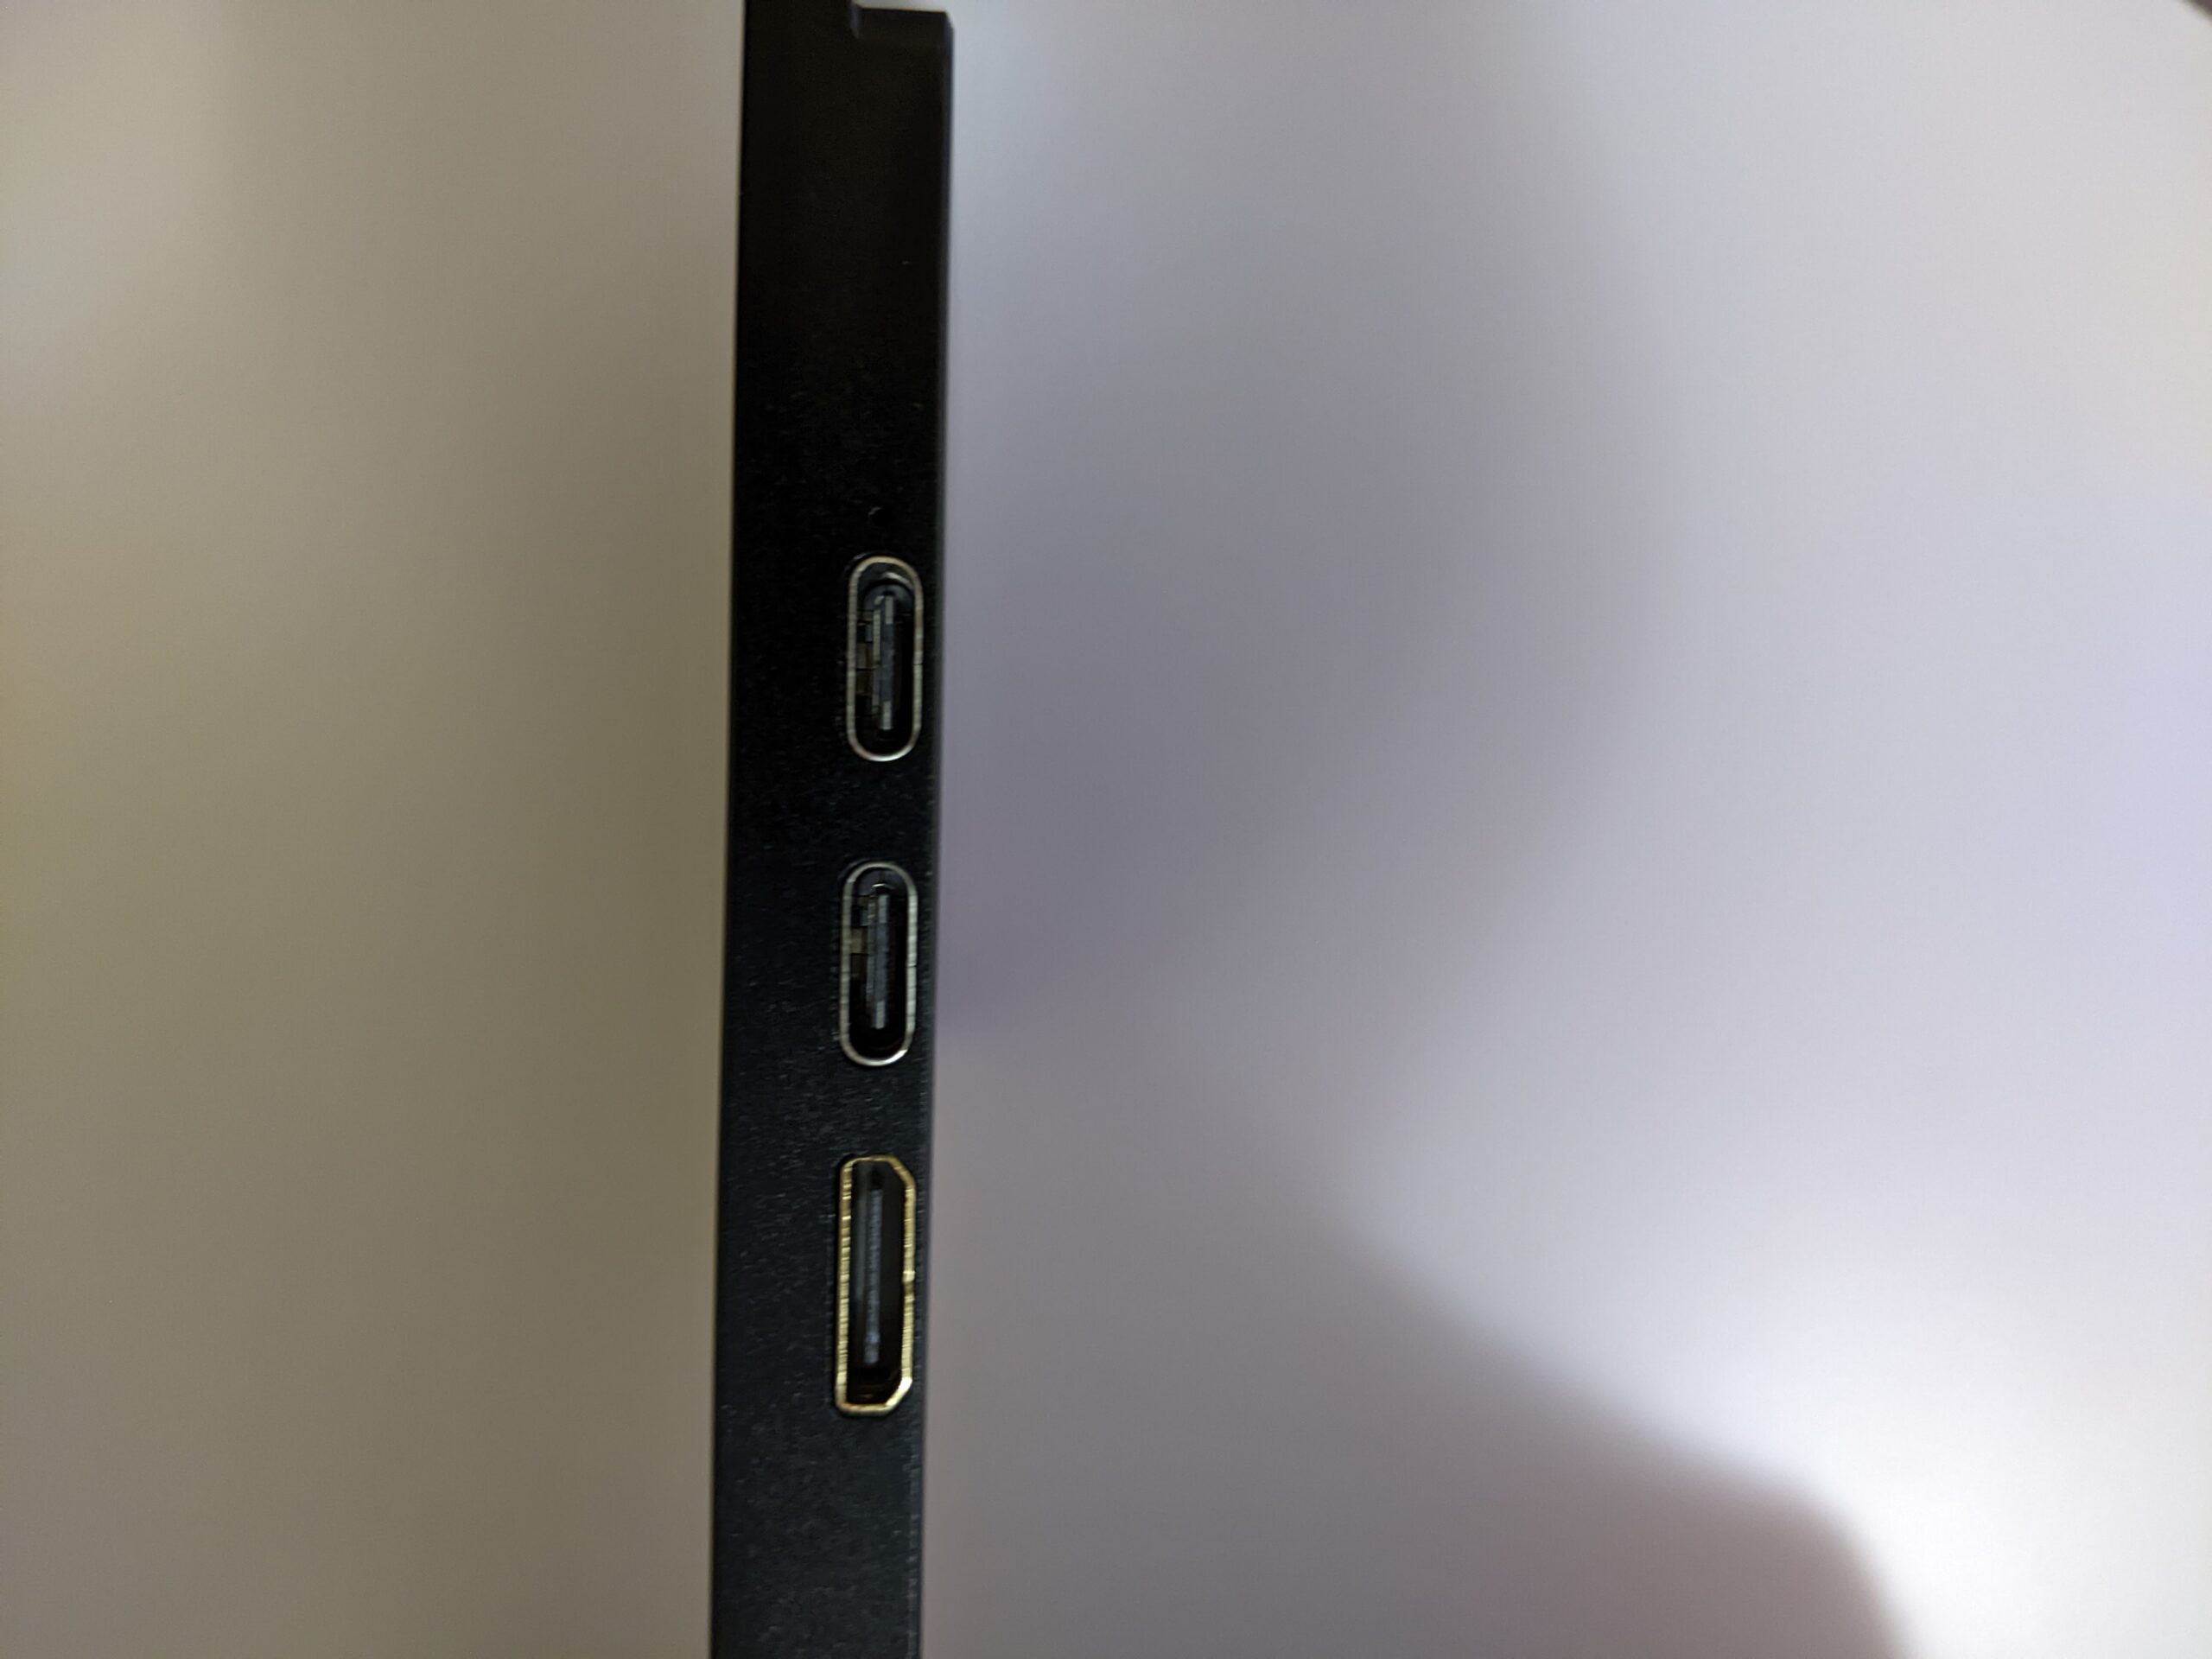 Connection ports for the Ingnok portable monitor